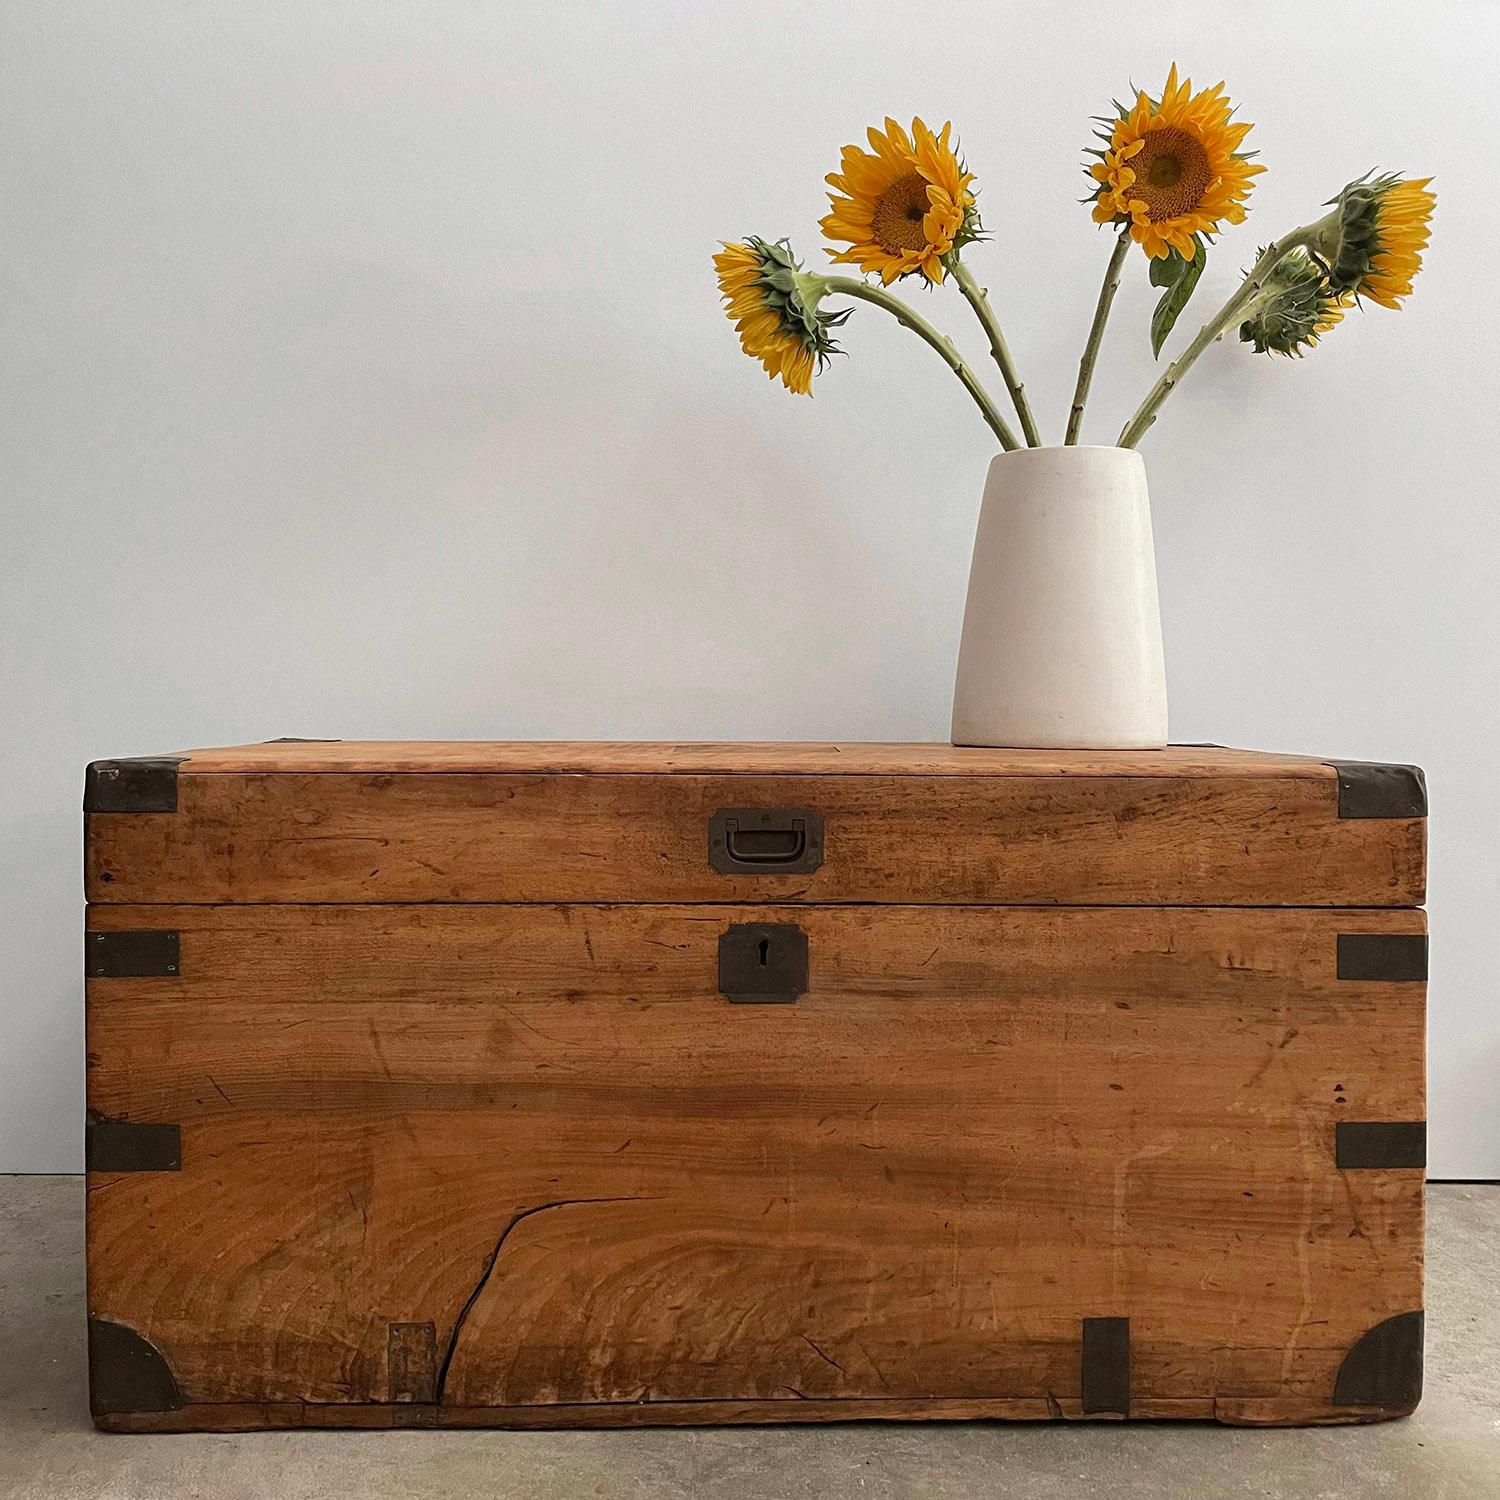 Antique cedar wood storage bench chest
We can’t say enough nice things about this piece 
Beautiful wood grain with natural oil & wax finish 
Newly reconditioned
Splitting to the wood but structurally sound
Looks and smells wonderful 
This chest